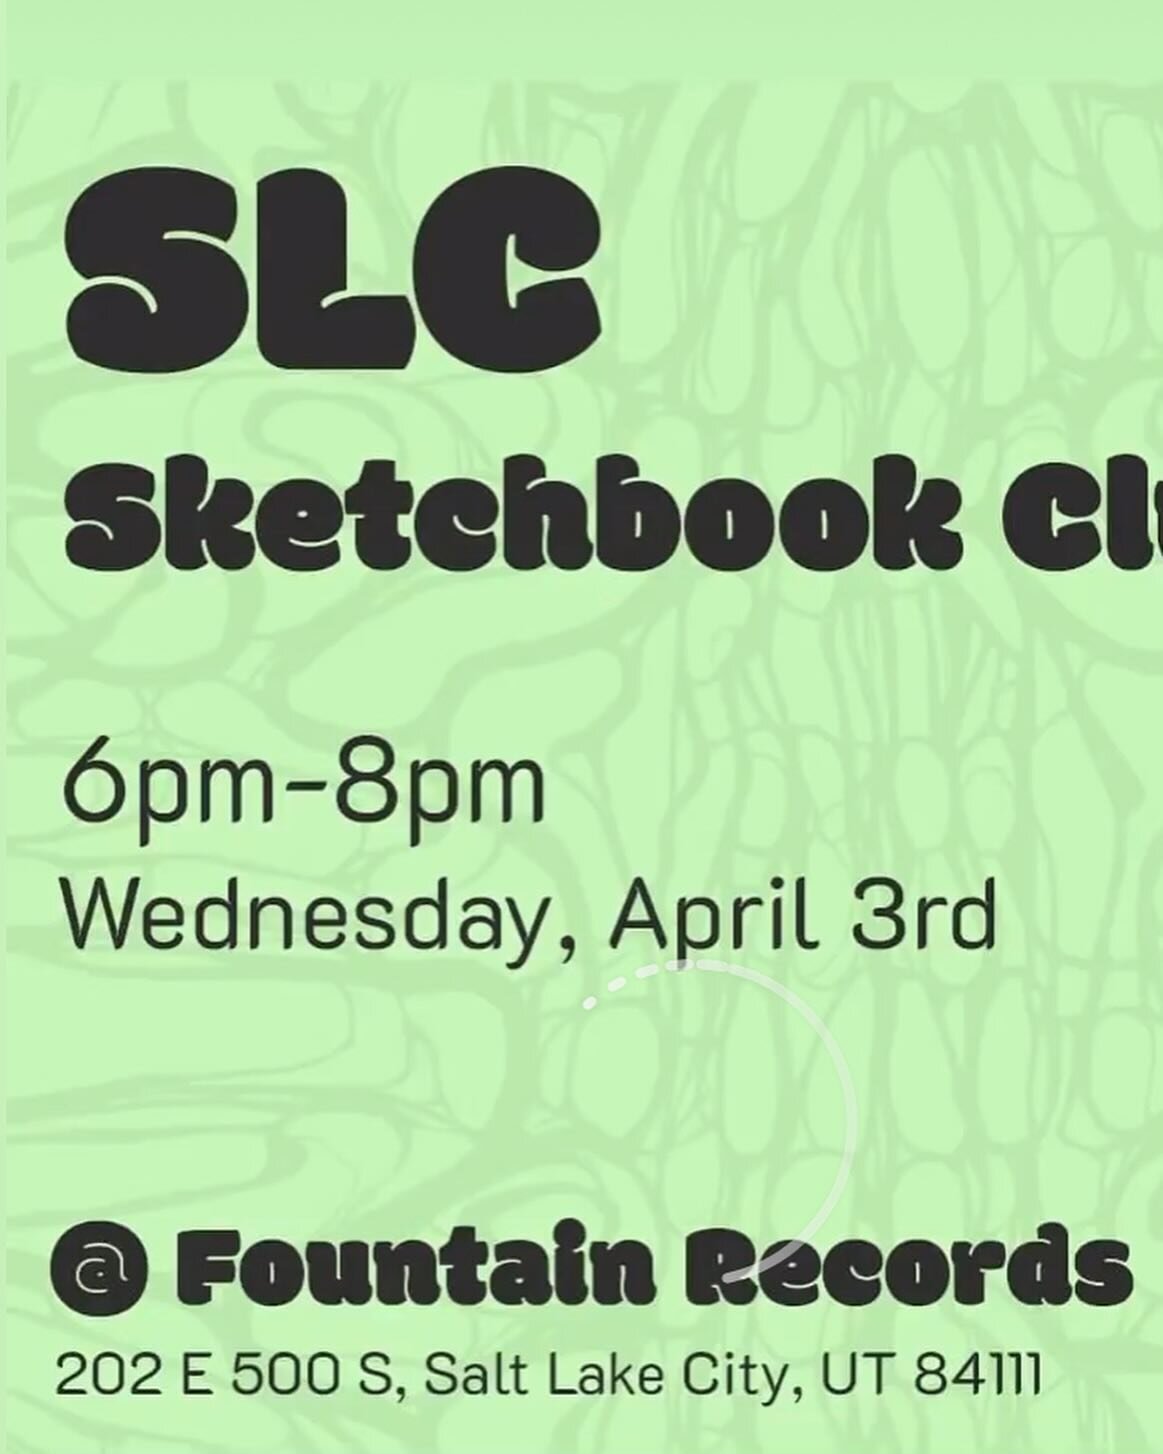 Every Wednesday we host @slcsketchbookclub 6-8, and we have a fun JNGL DJ Session 3-7pm with @nicajoeespresso and several awesome DJs like @ingsharp @andydoorss @netsylph come by !!